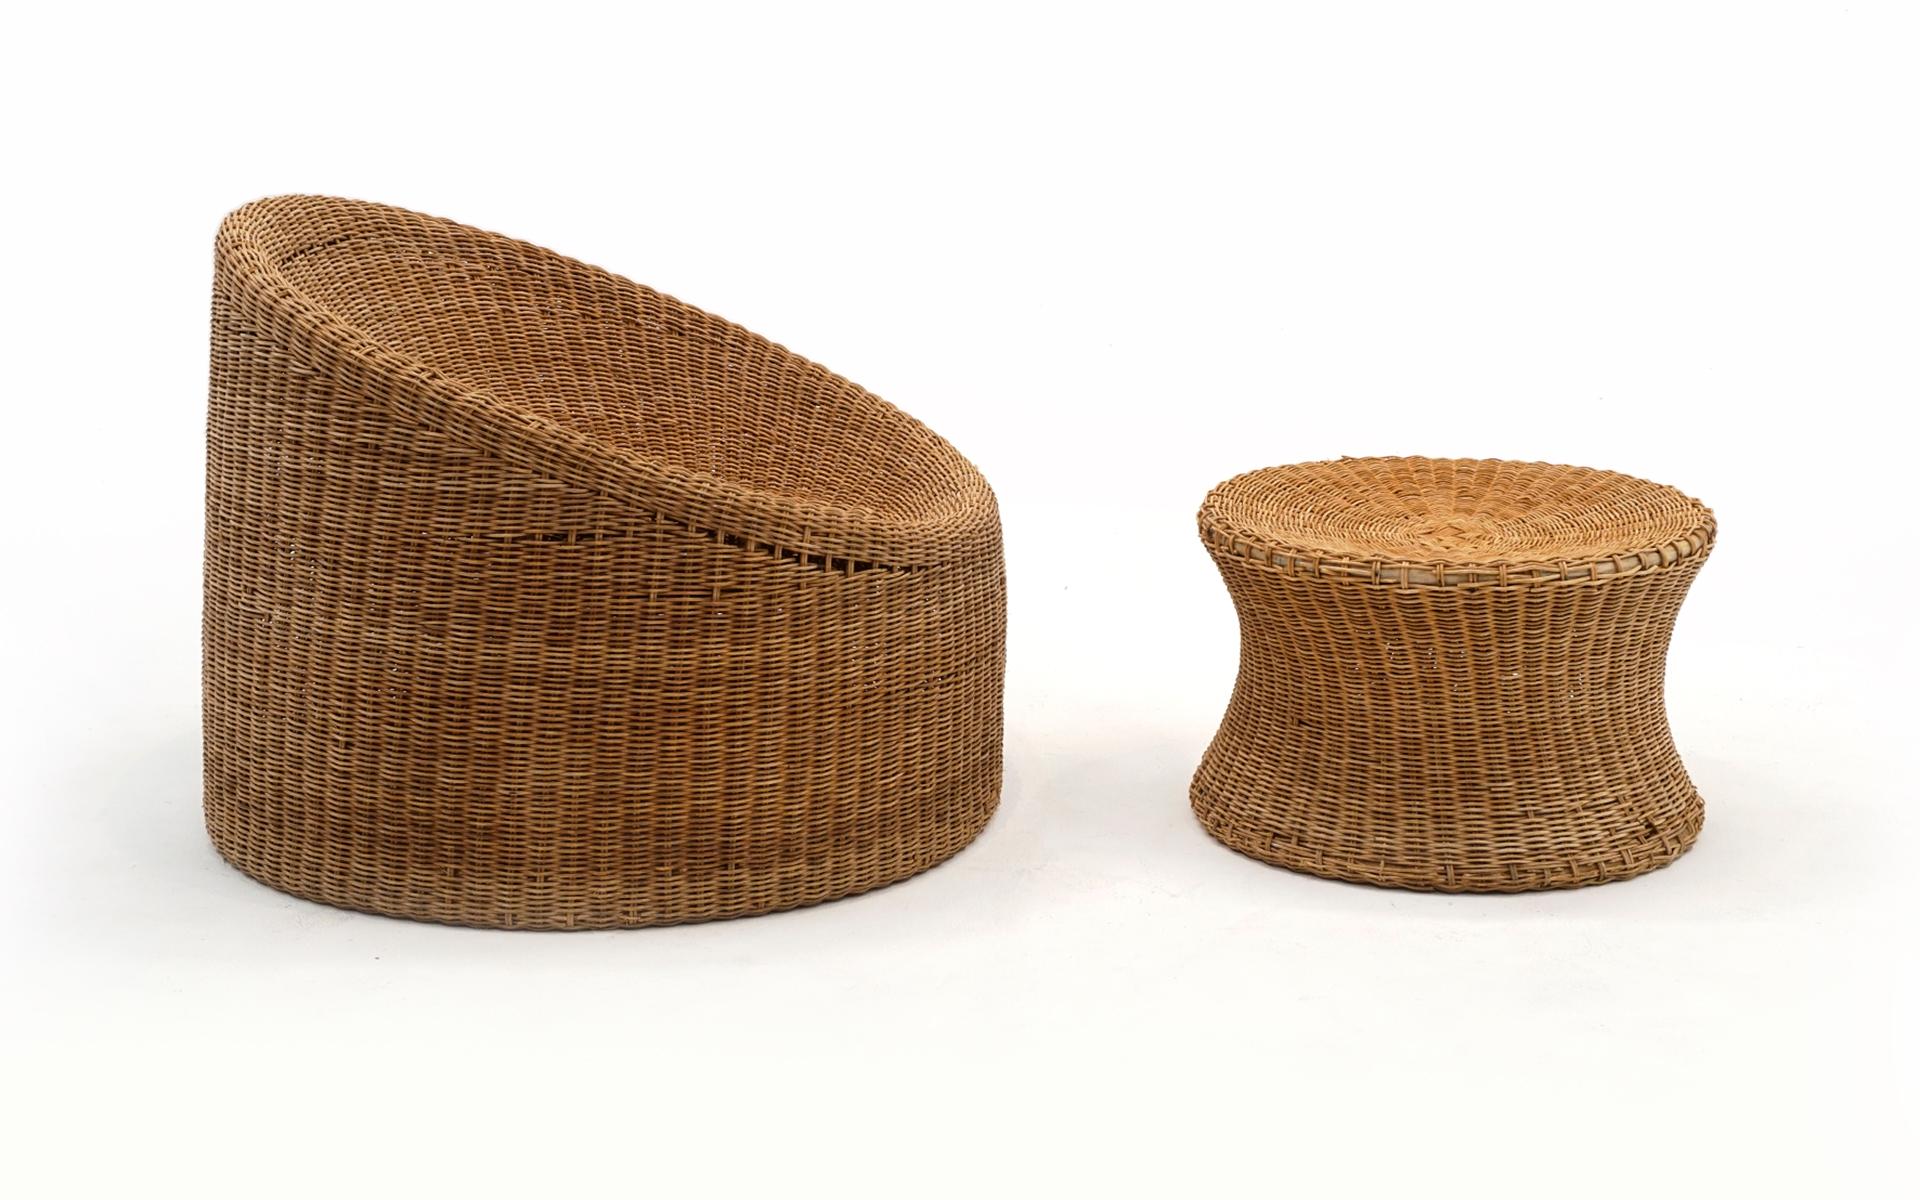 Round wicker chair and ottoman designed by Eero Aarnio, Finland, 1960s. Both are structurally sound and very comfortable. The are a few breaks in the wicker and an area of lose to the edge of the ottoman (see photos) None of these are a distraction